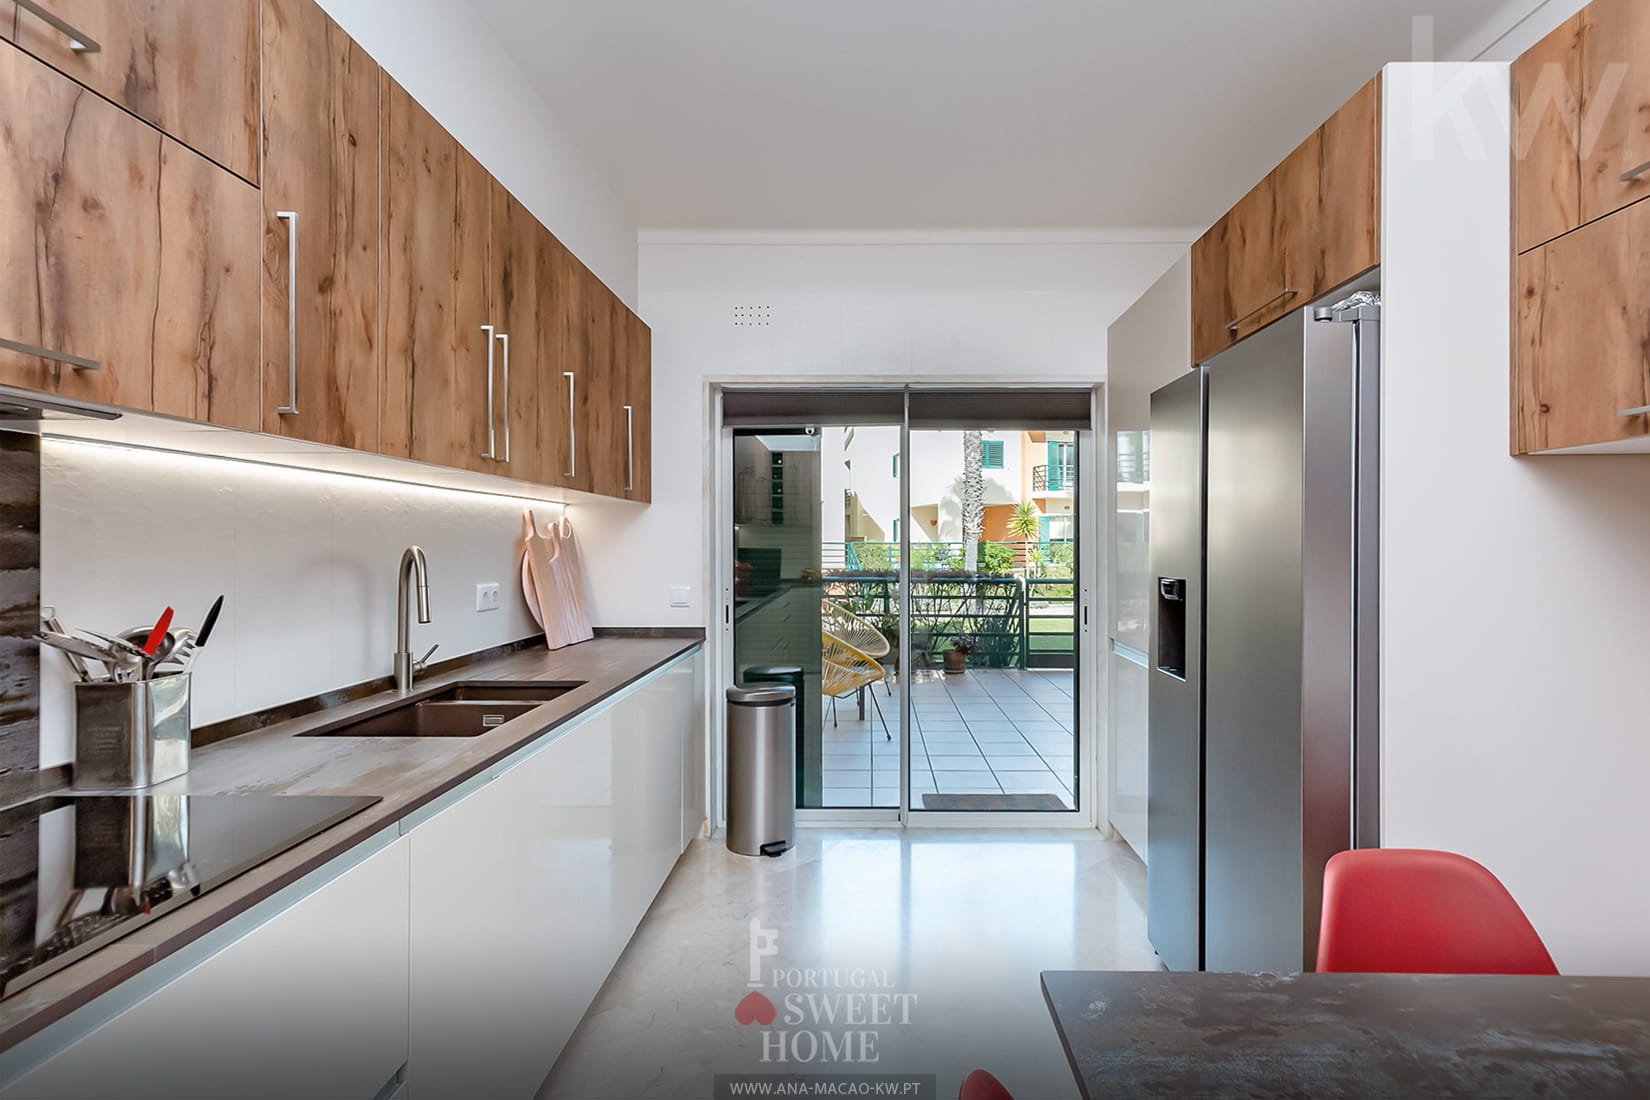 Kitchen (15 m²) renovated with access to the terrace overlooking the condominium